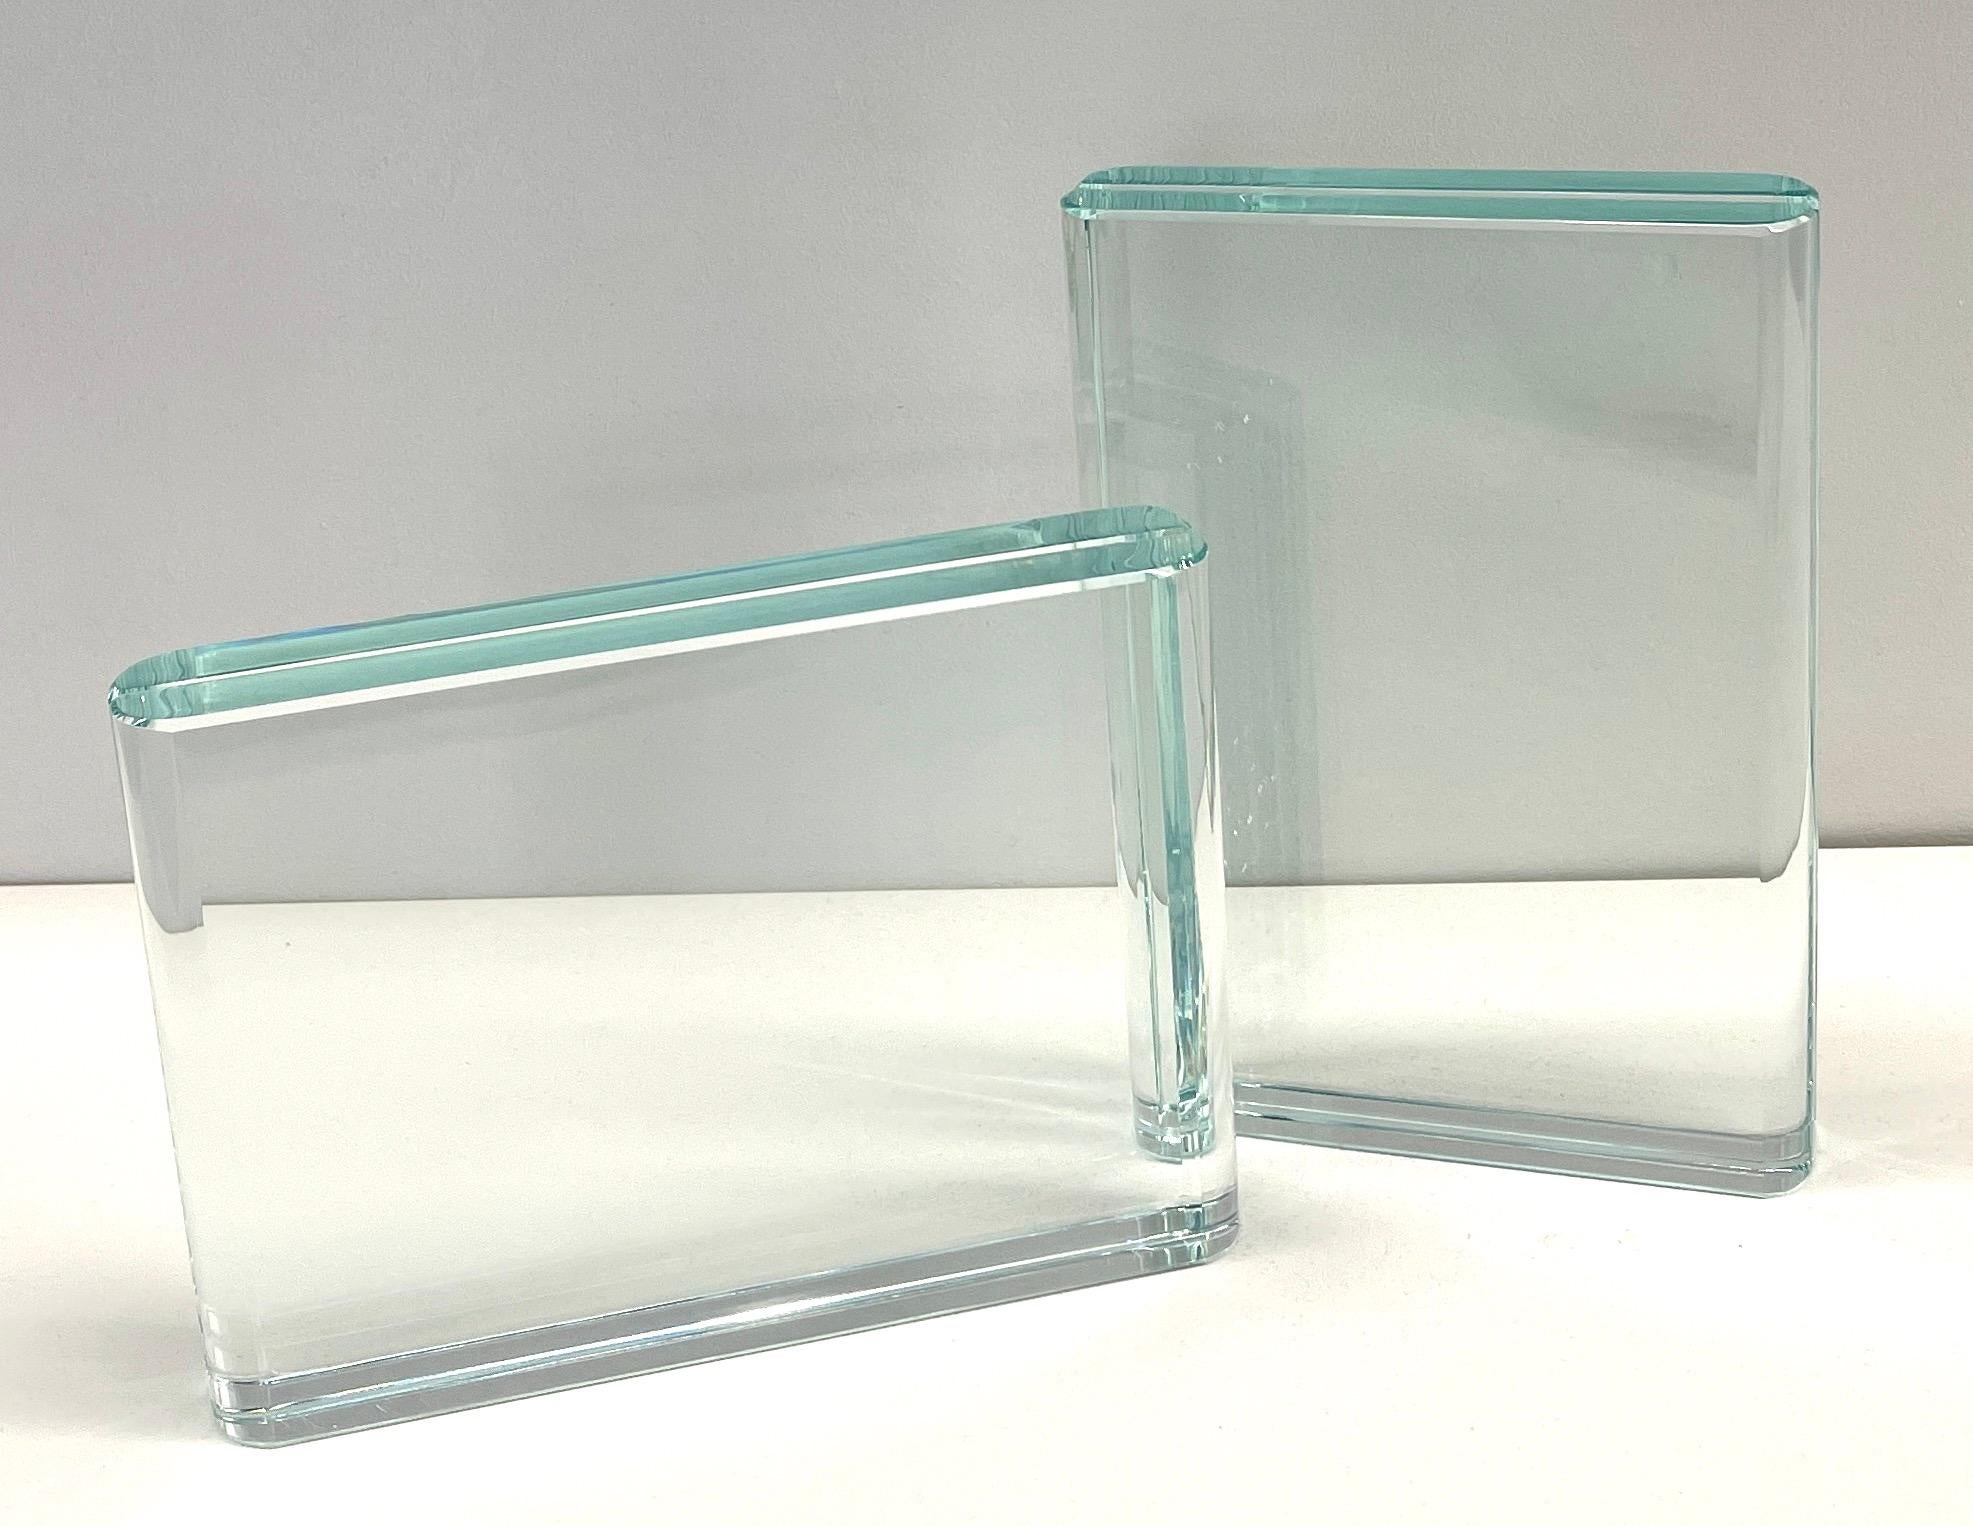 Set of two photo frames, one horizontal and one vertical, of excellent workmanship and artistic quality.
The rounded edges give harmony and elegance.
The high transparency crystal has very bright reflections. Being worked entirely by hand with